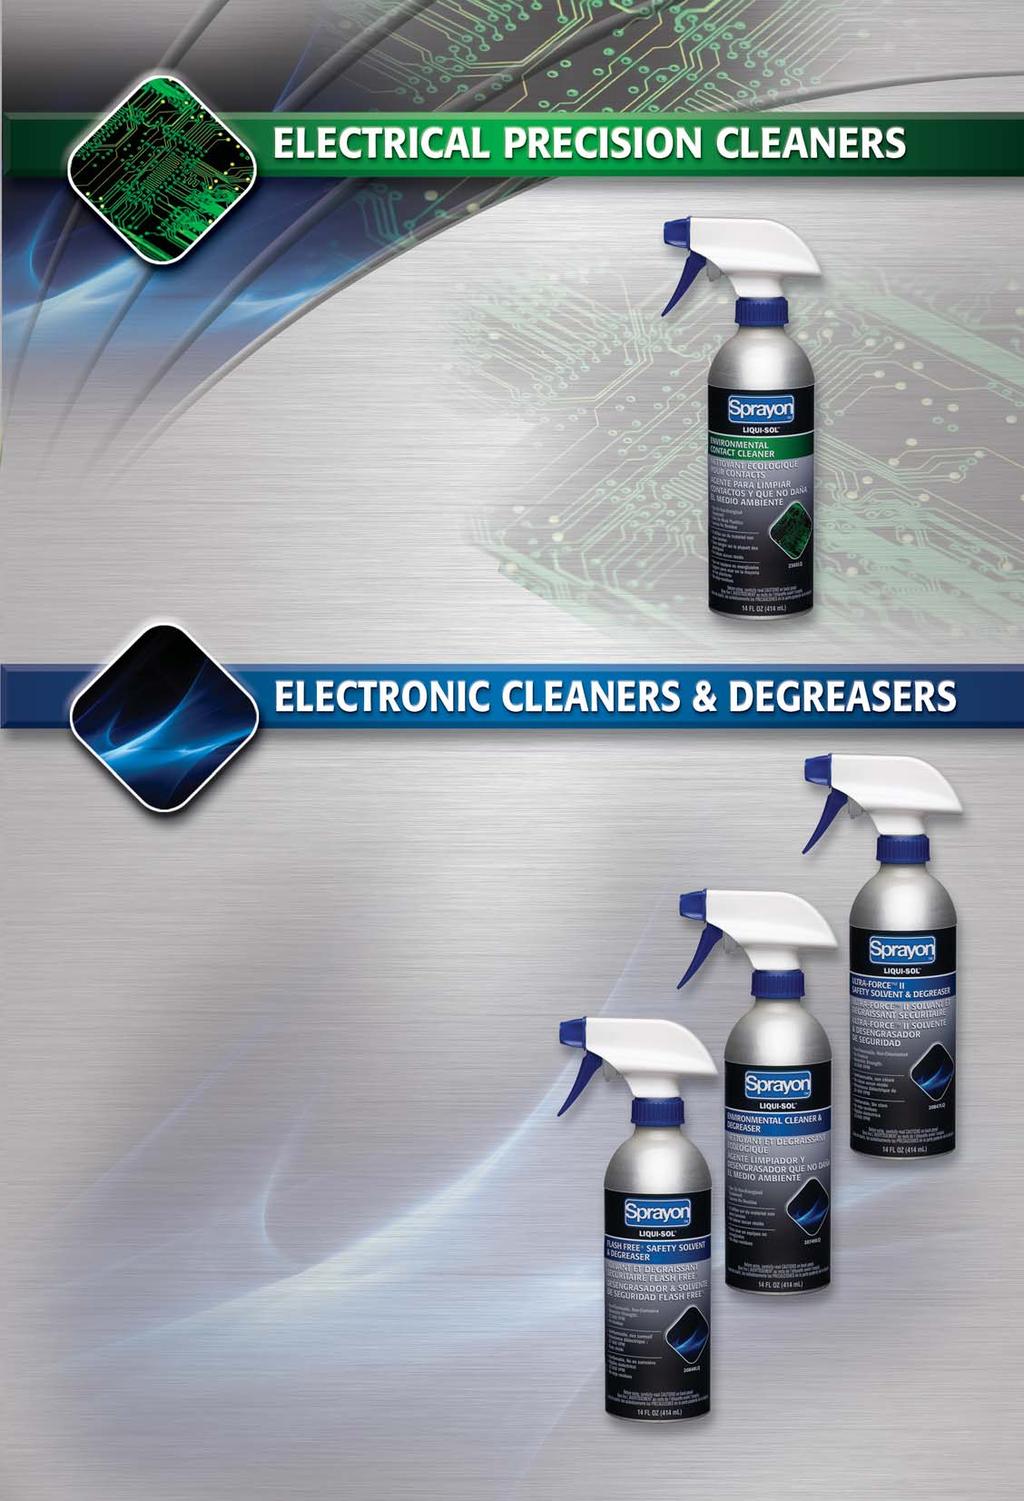 A002302LQ Environmental Contact Cleaner is a non-ozone depleting cleaner that removes oil, grease and dirt from sensitive equipment and precision instruments leaving no residue.